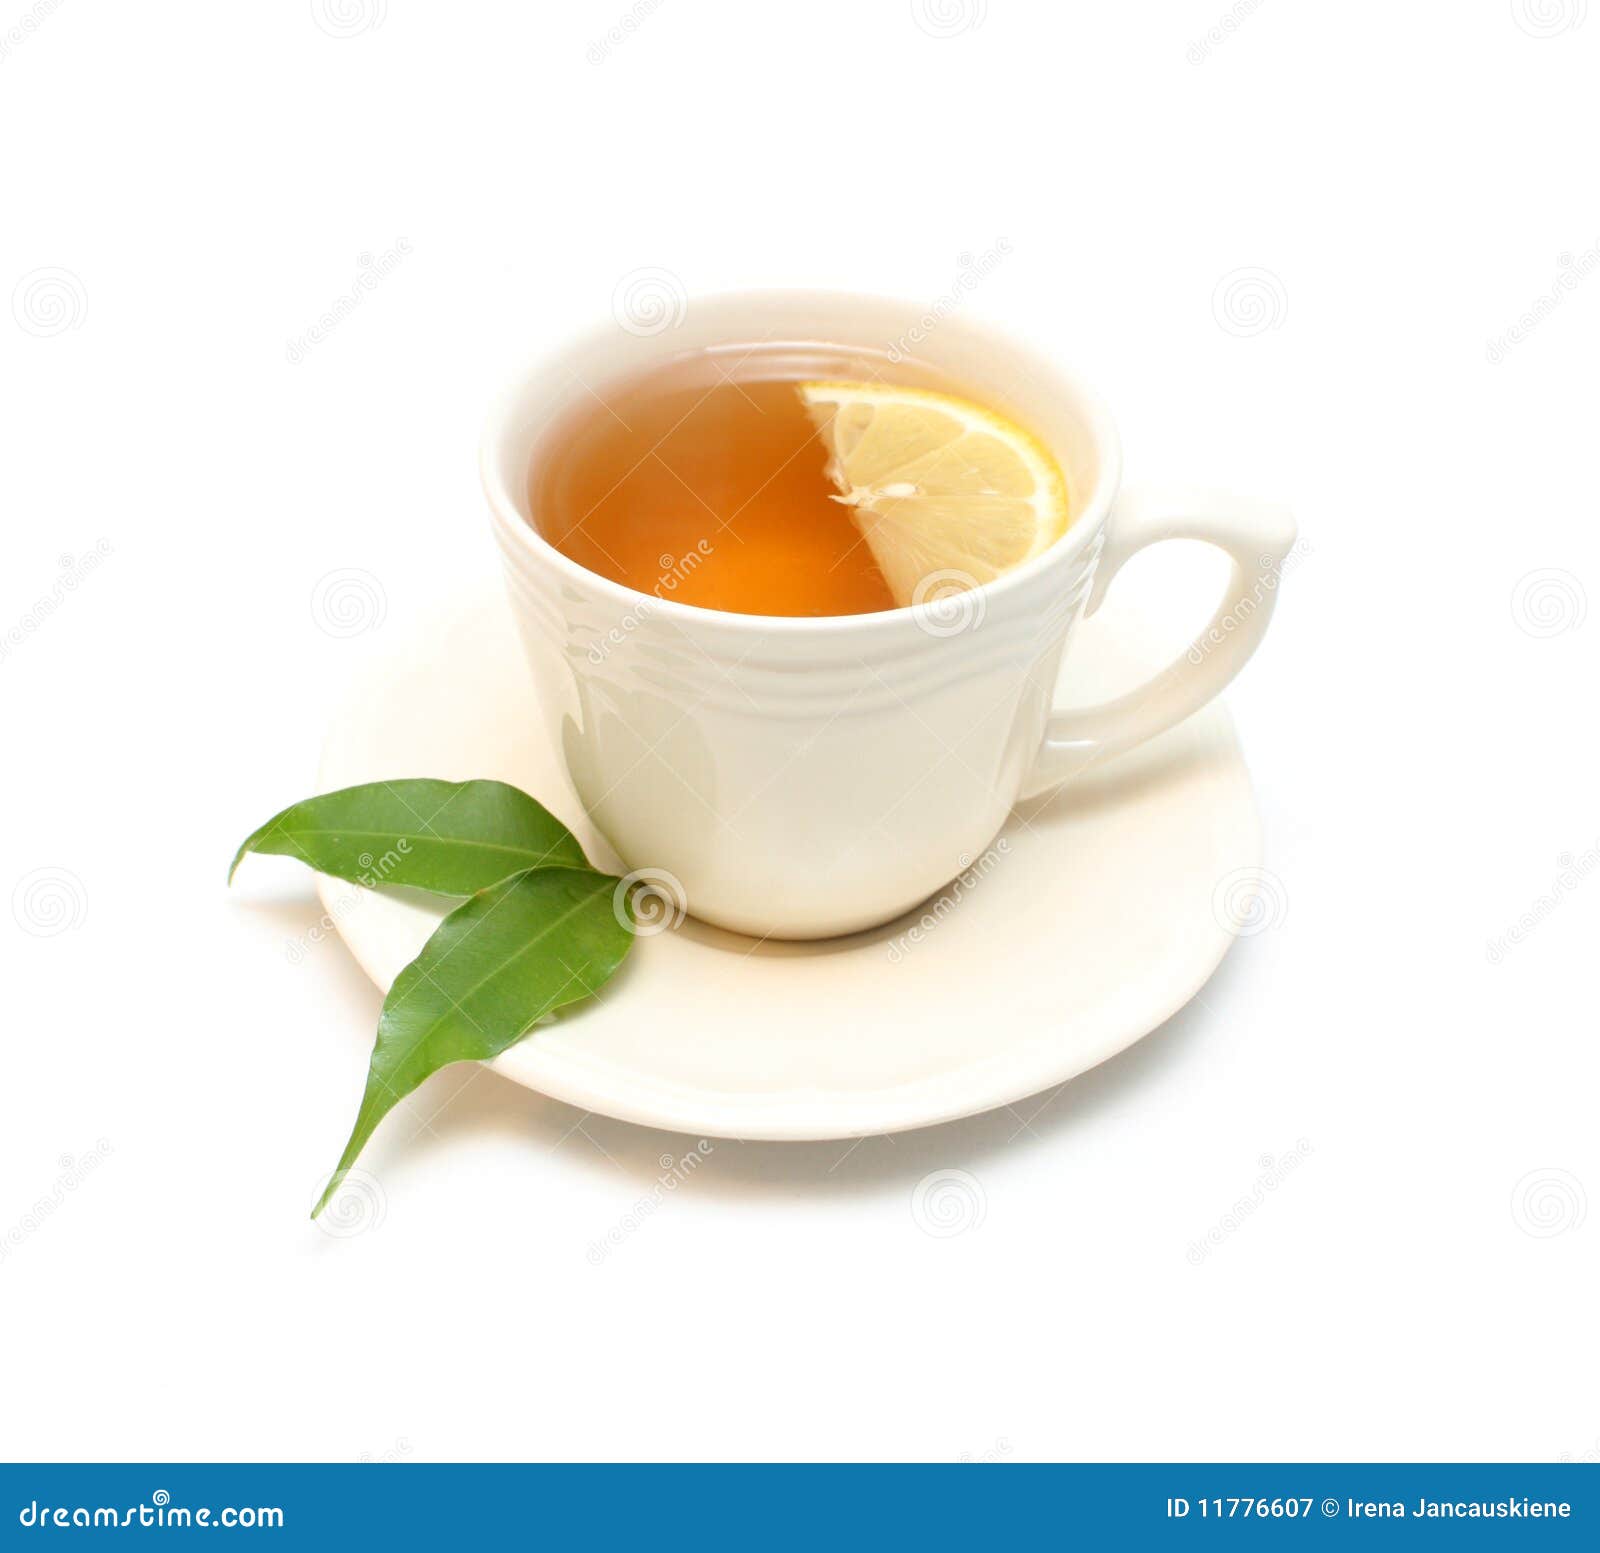 Tea with lemon stock image. Image of indoors, simplicity - 11776607